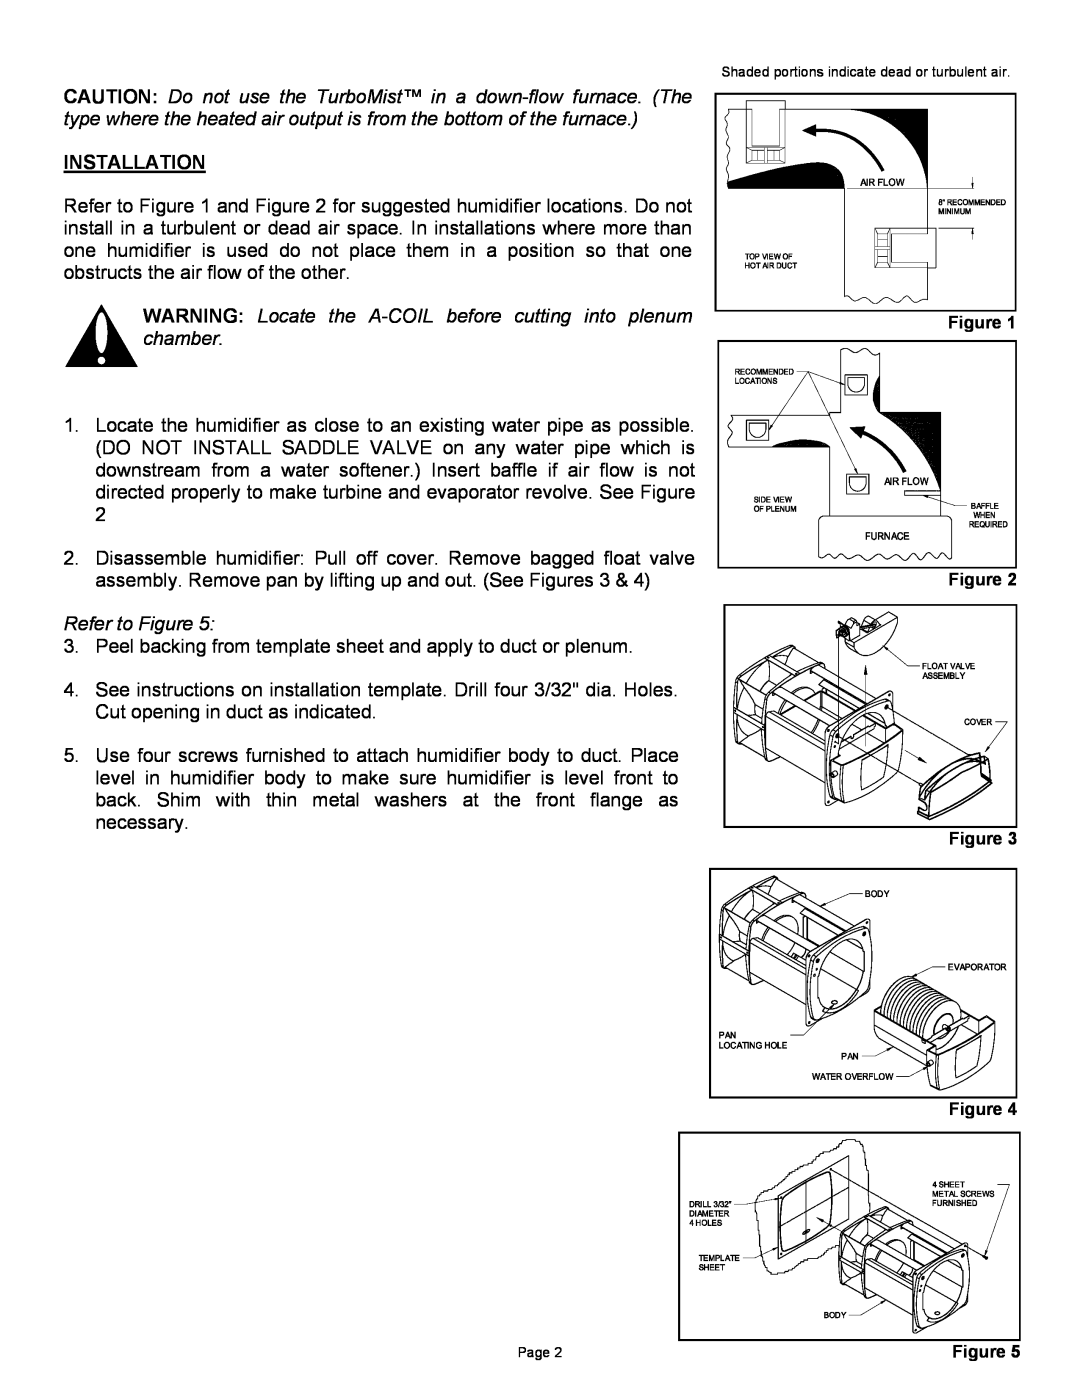 Field Controls TB-1 manual Installation, WARNING Locate the A-COIL before cutting into plenum chamber, Refer to Figure 